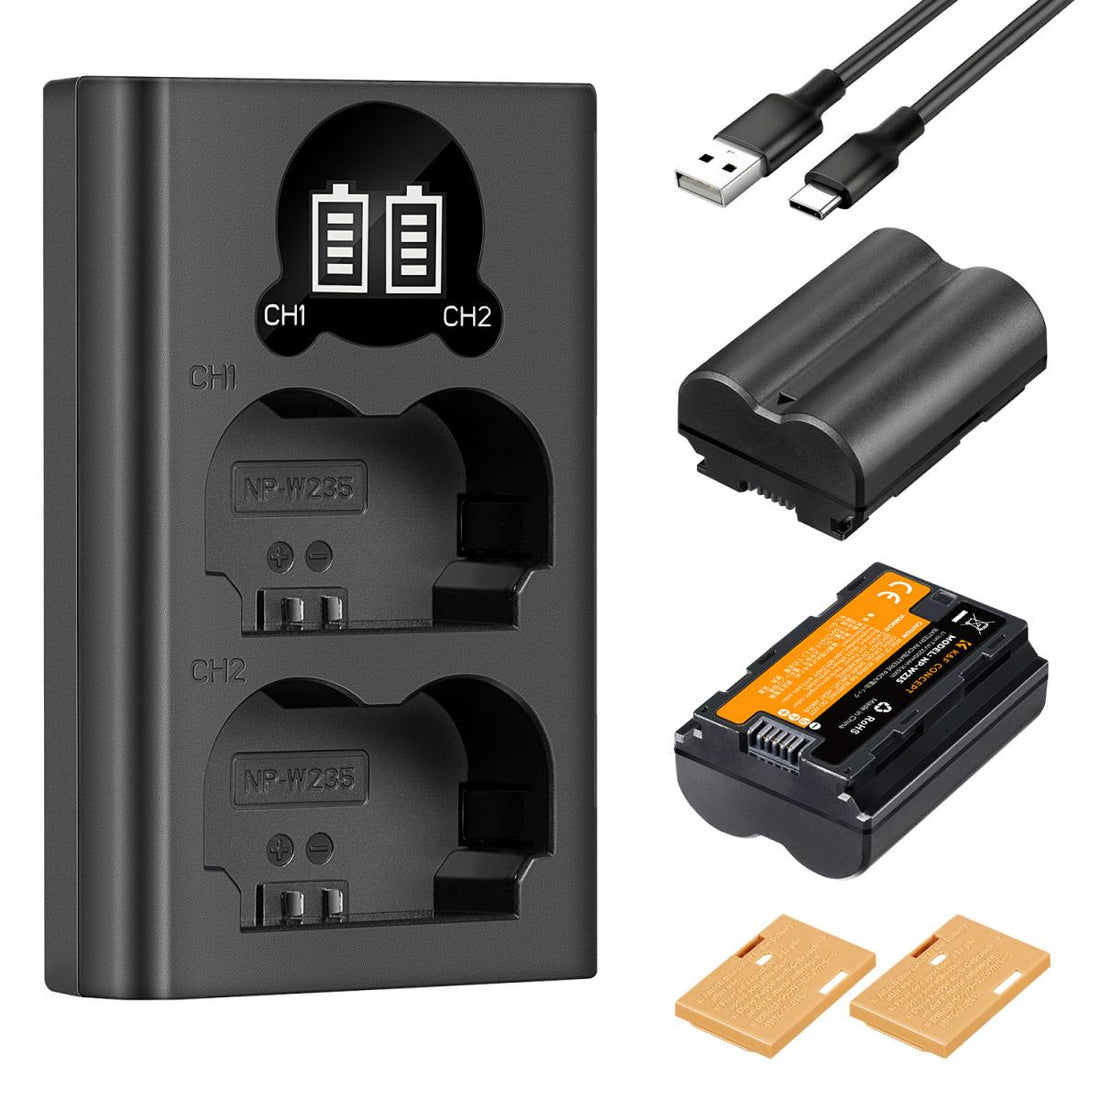 K&amp;F Concept Dual NP-W235 Battery + Charger Kit for Fuji Cameras-KF28.0018